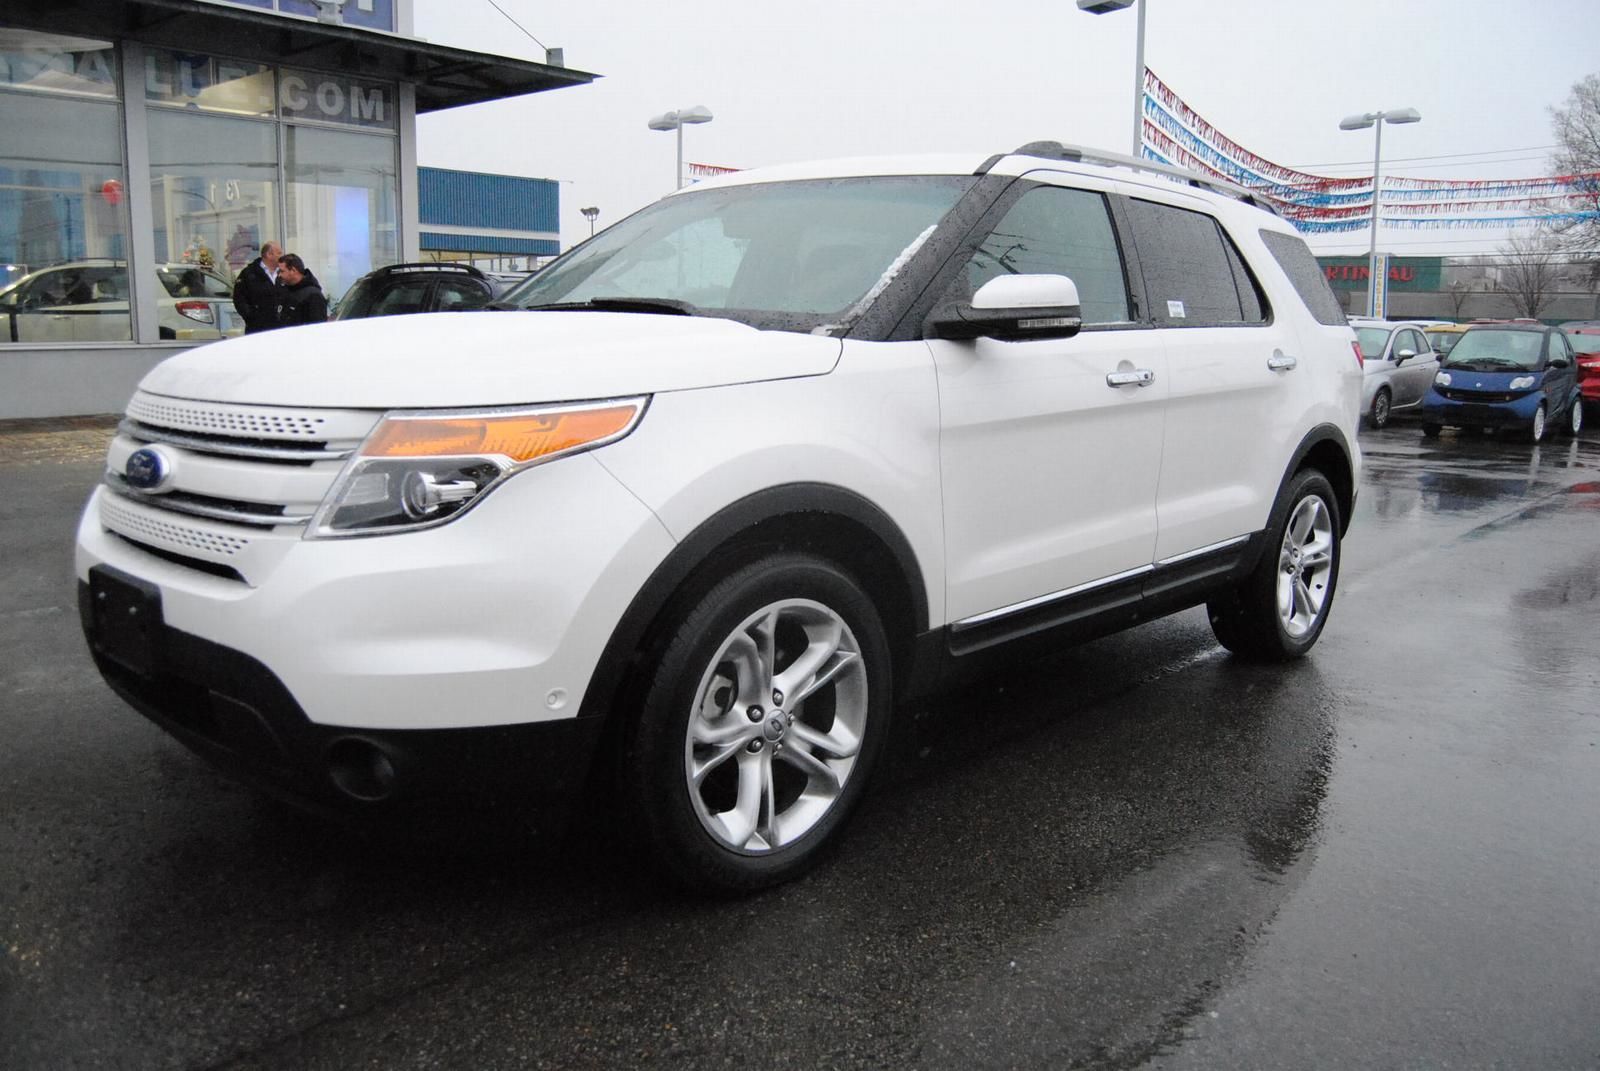 Used 2011 ford explorer limited #5